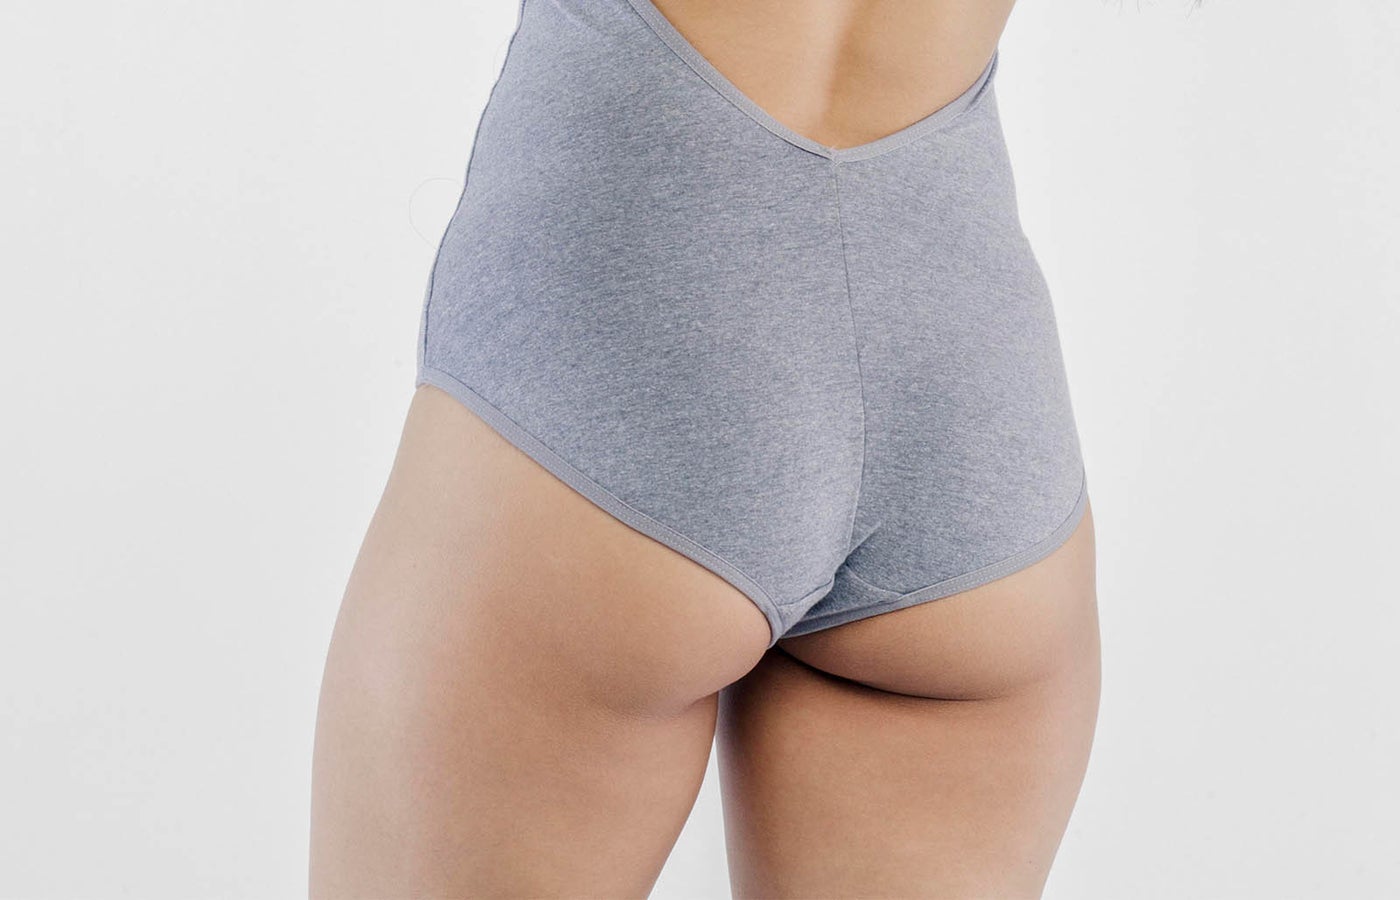 Do I Need to Wear a Compression Garment Post BodyTite Liposuction?